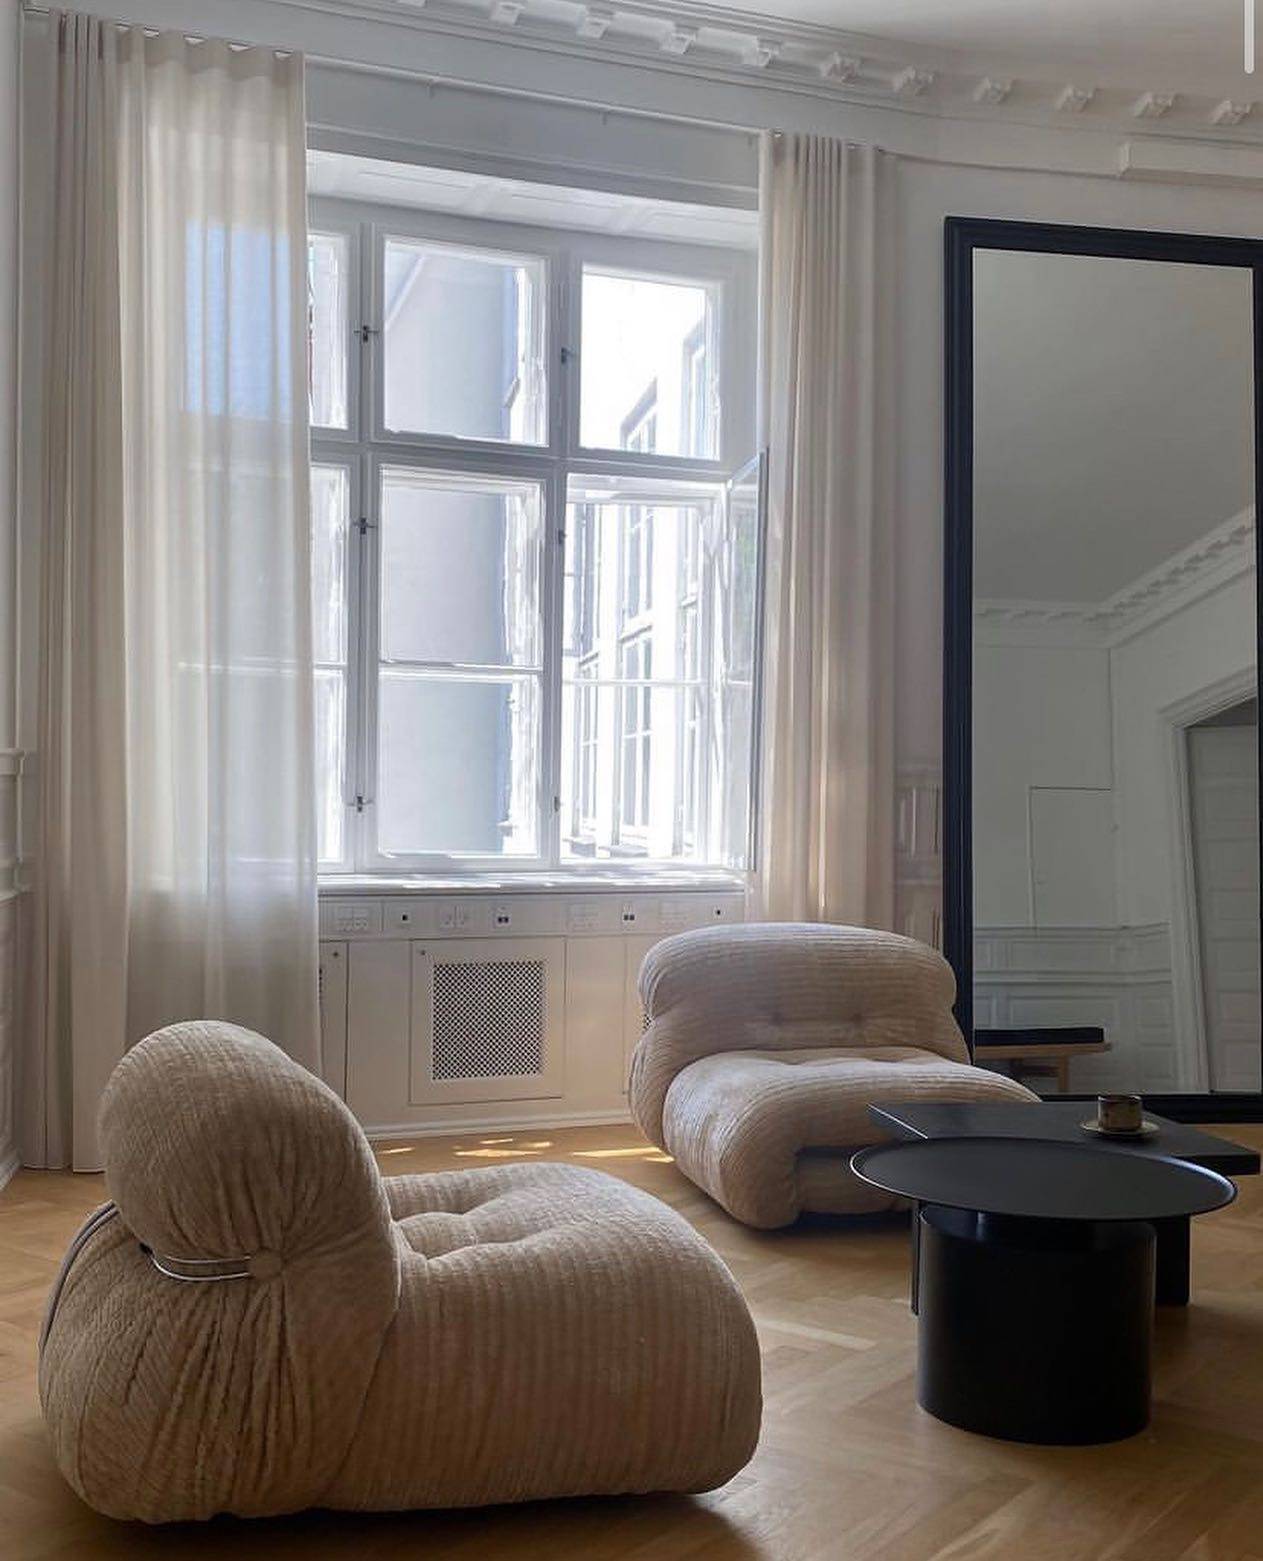 https://curtain.dk/collections/gardiner/products/cloud